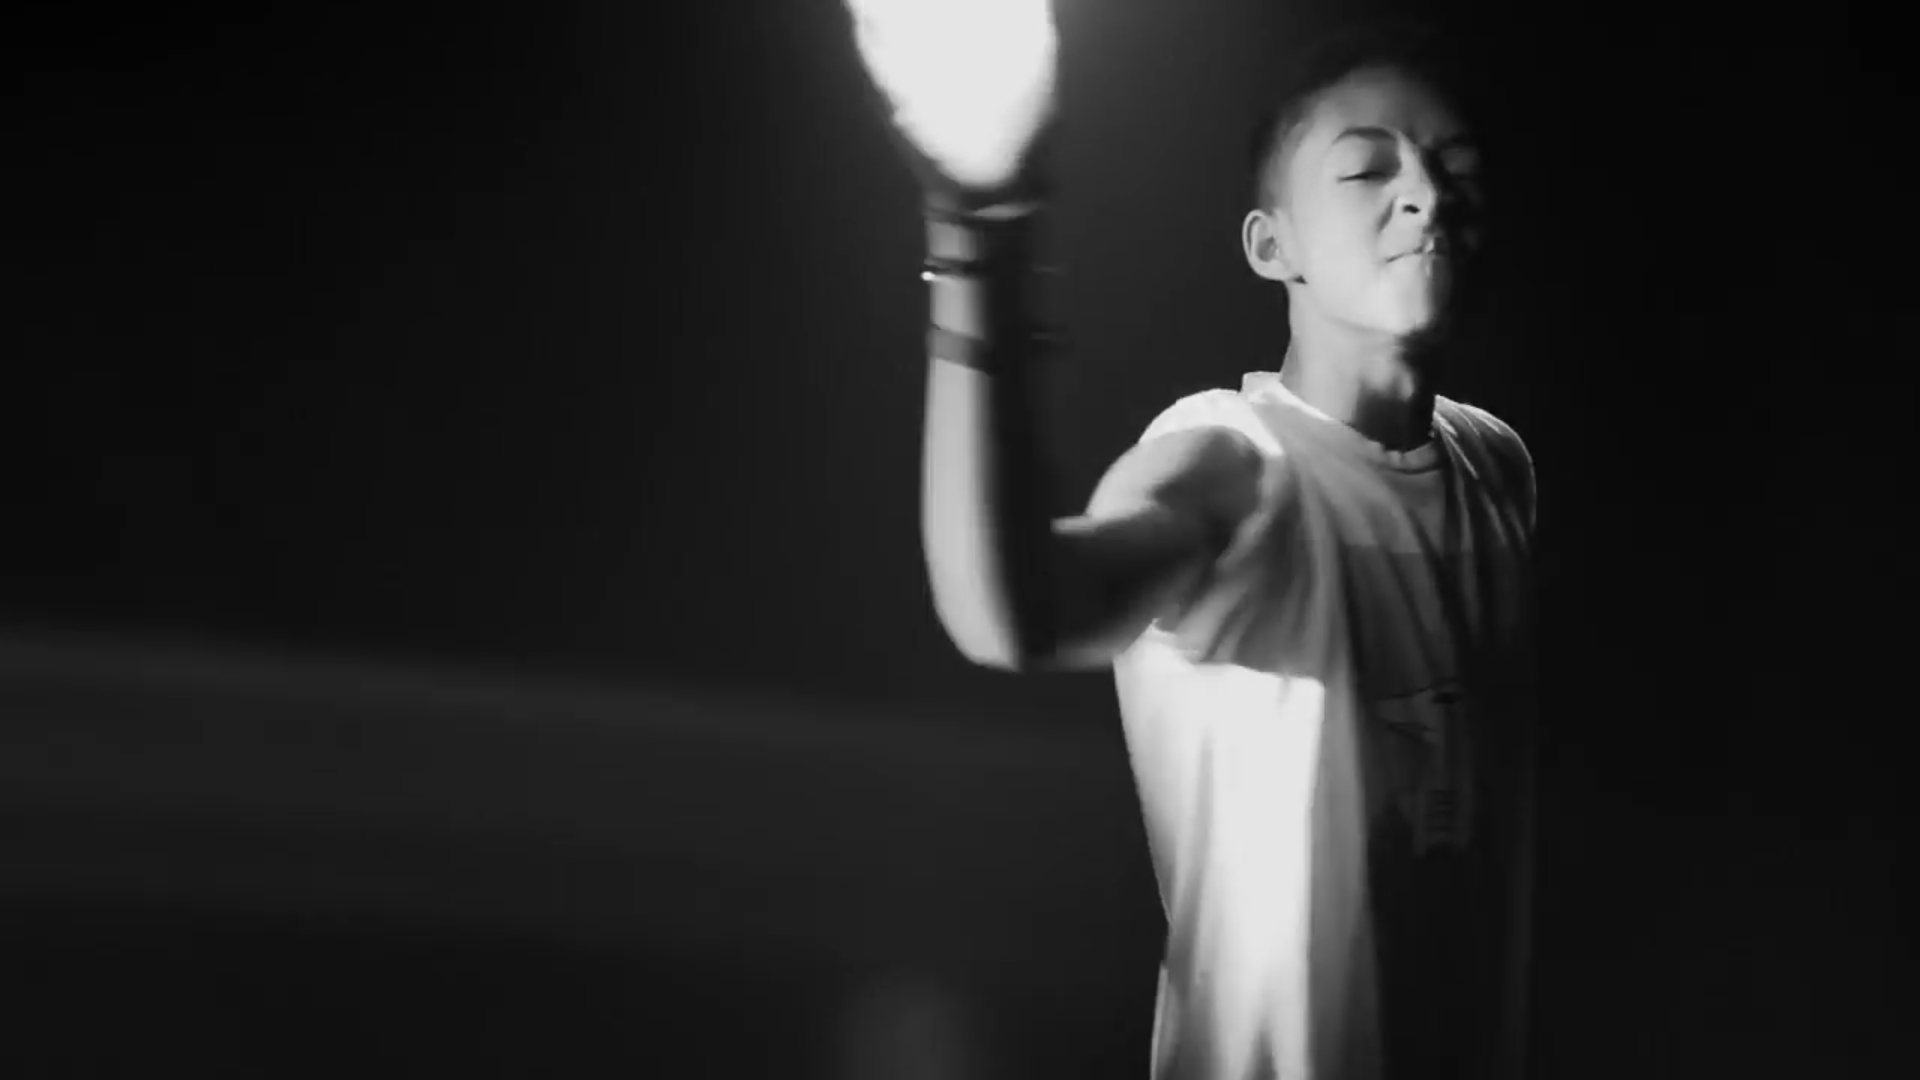 Picture Of Jaden Smith In Music Video Give It To Em Jaden Smith 1643440879 Teen Idols 4 You 0549